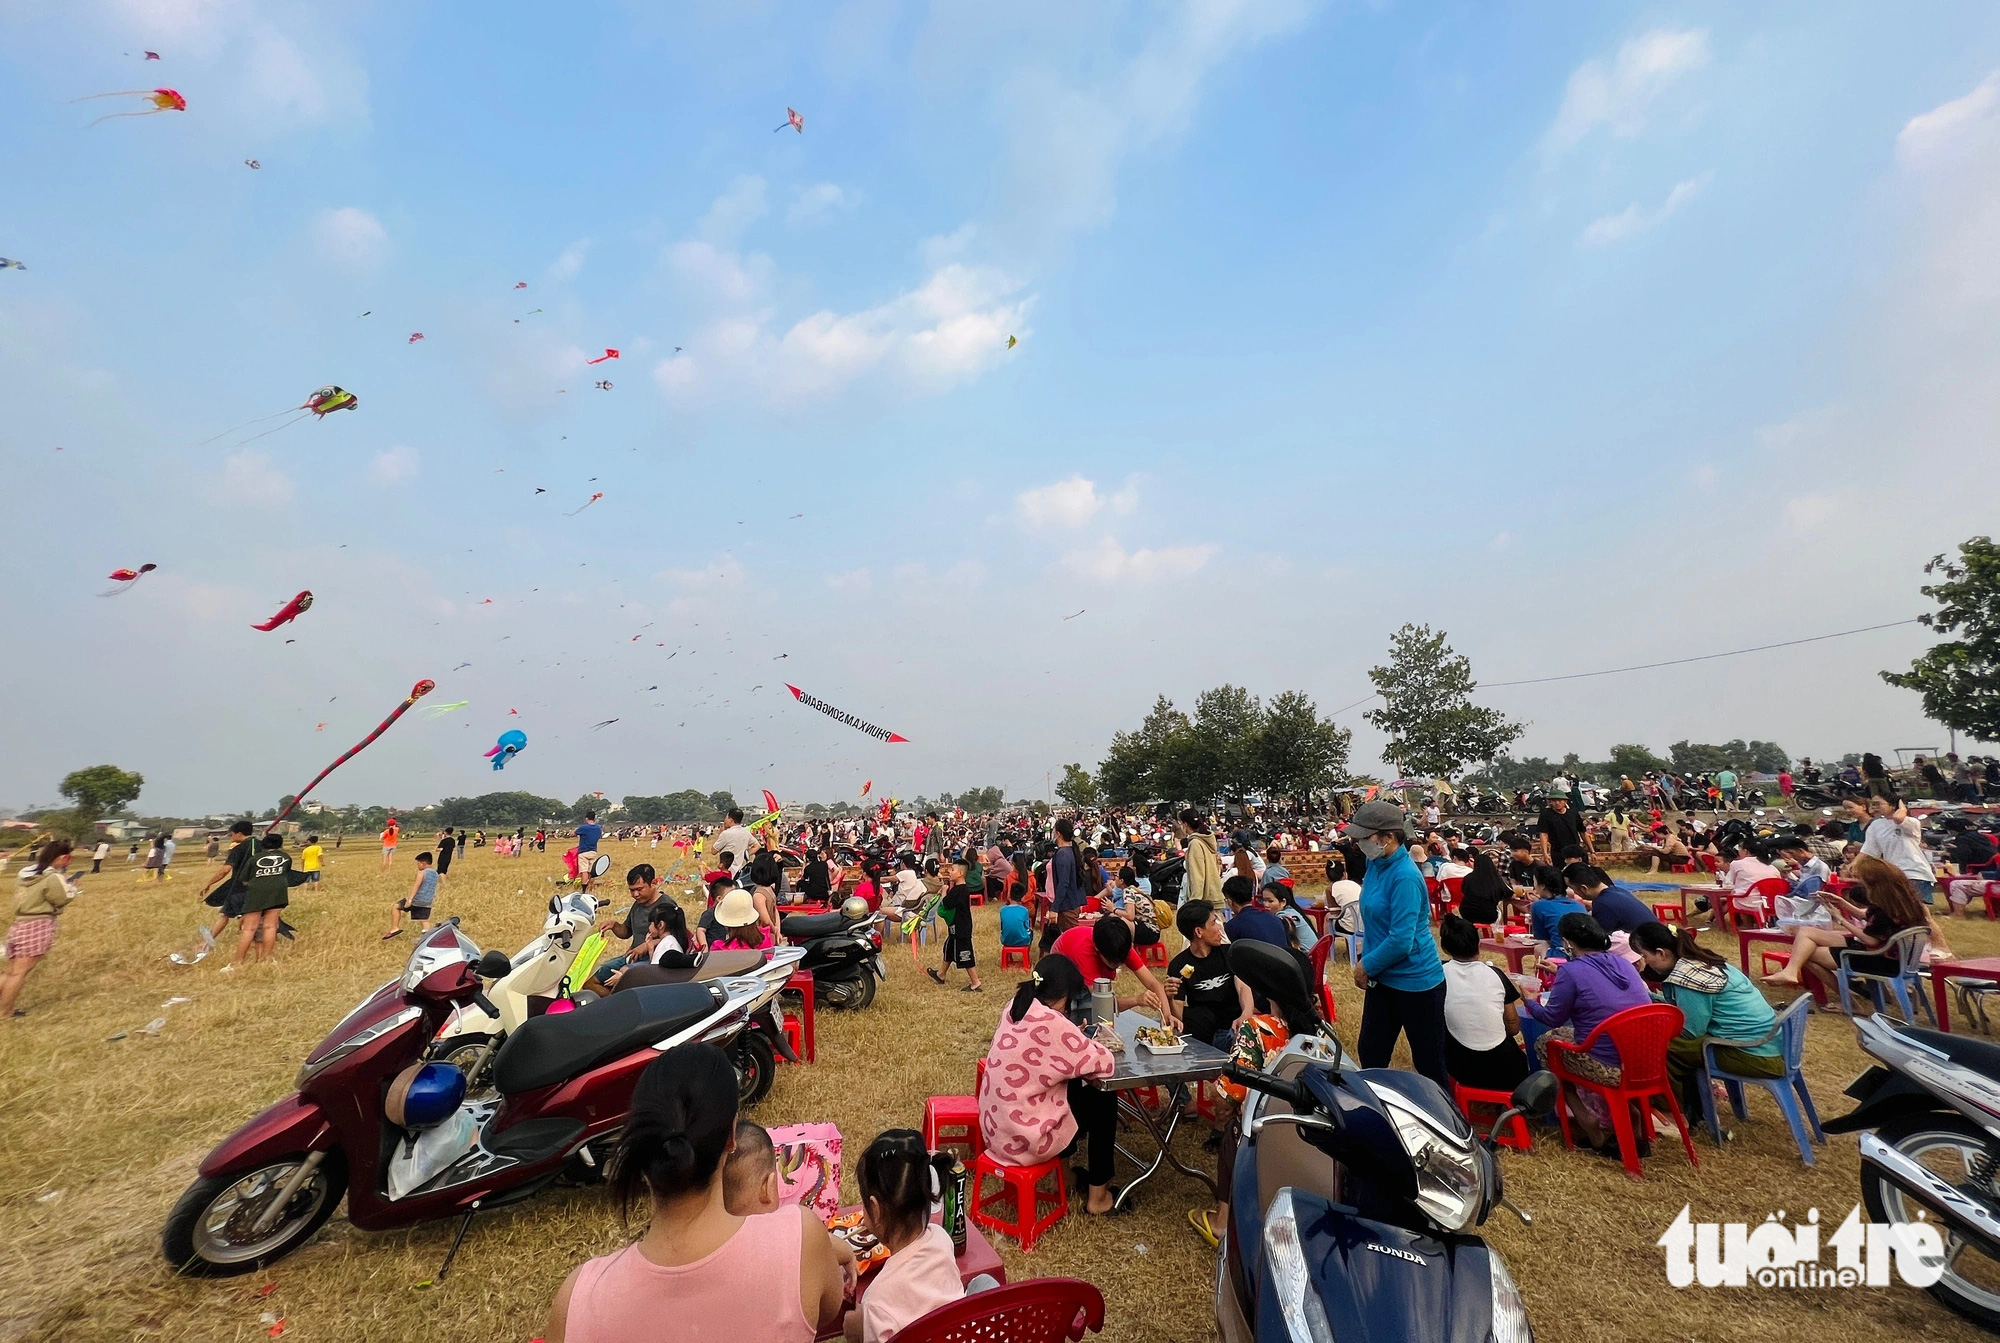 People gather to fly kites at a field along Nguyen Thi Danh Road in the suburban district of Hoc Mon, Ho Chi Minh City. Photo: Yen Trinh / Tuoi Tre